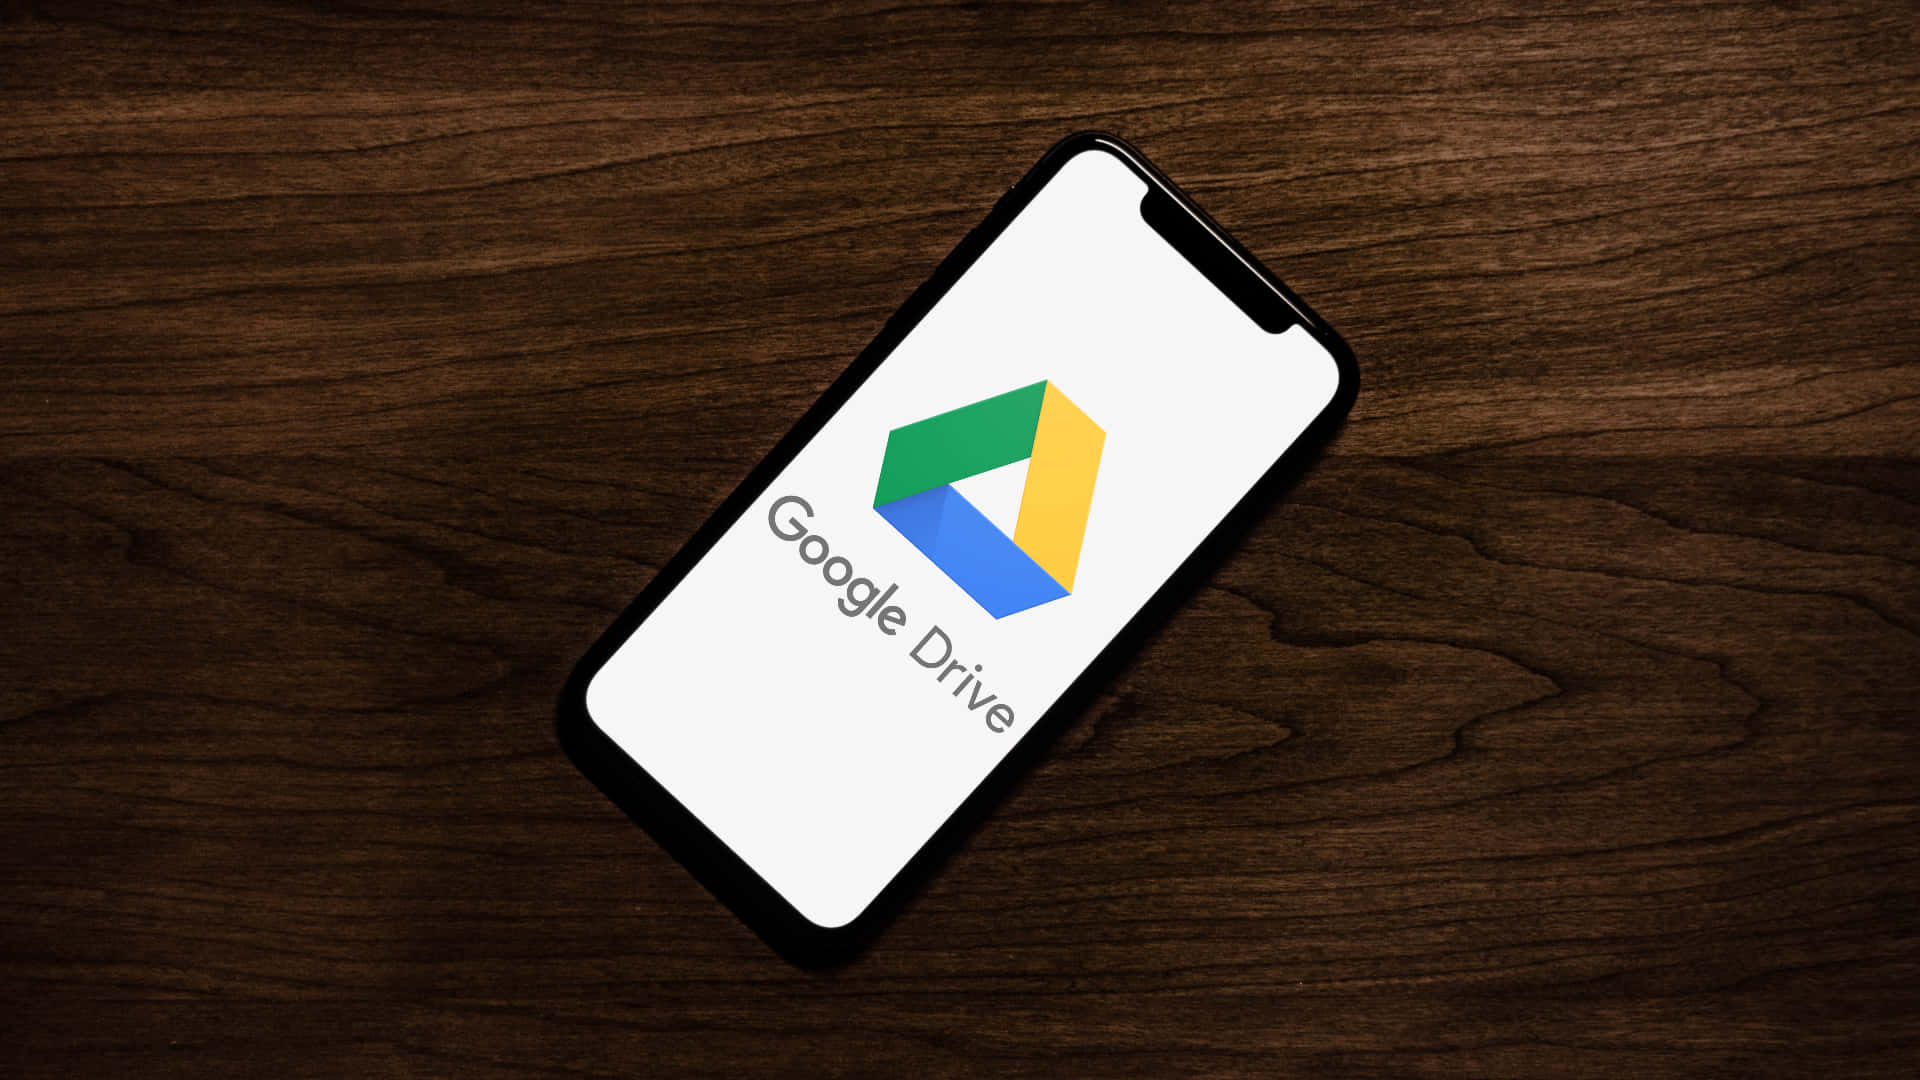 Google Drive On Wooden Table Wallpaper